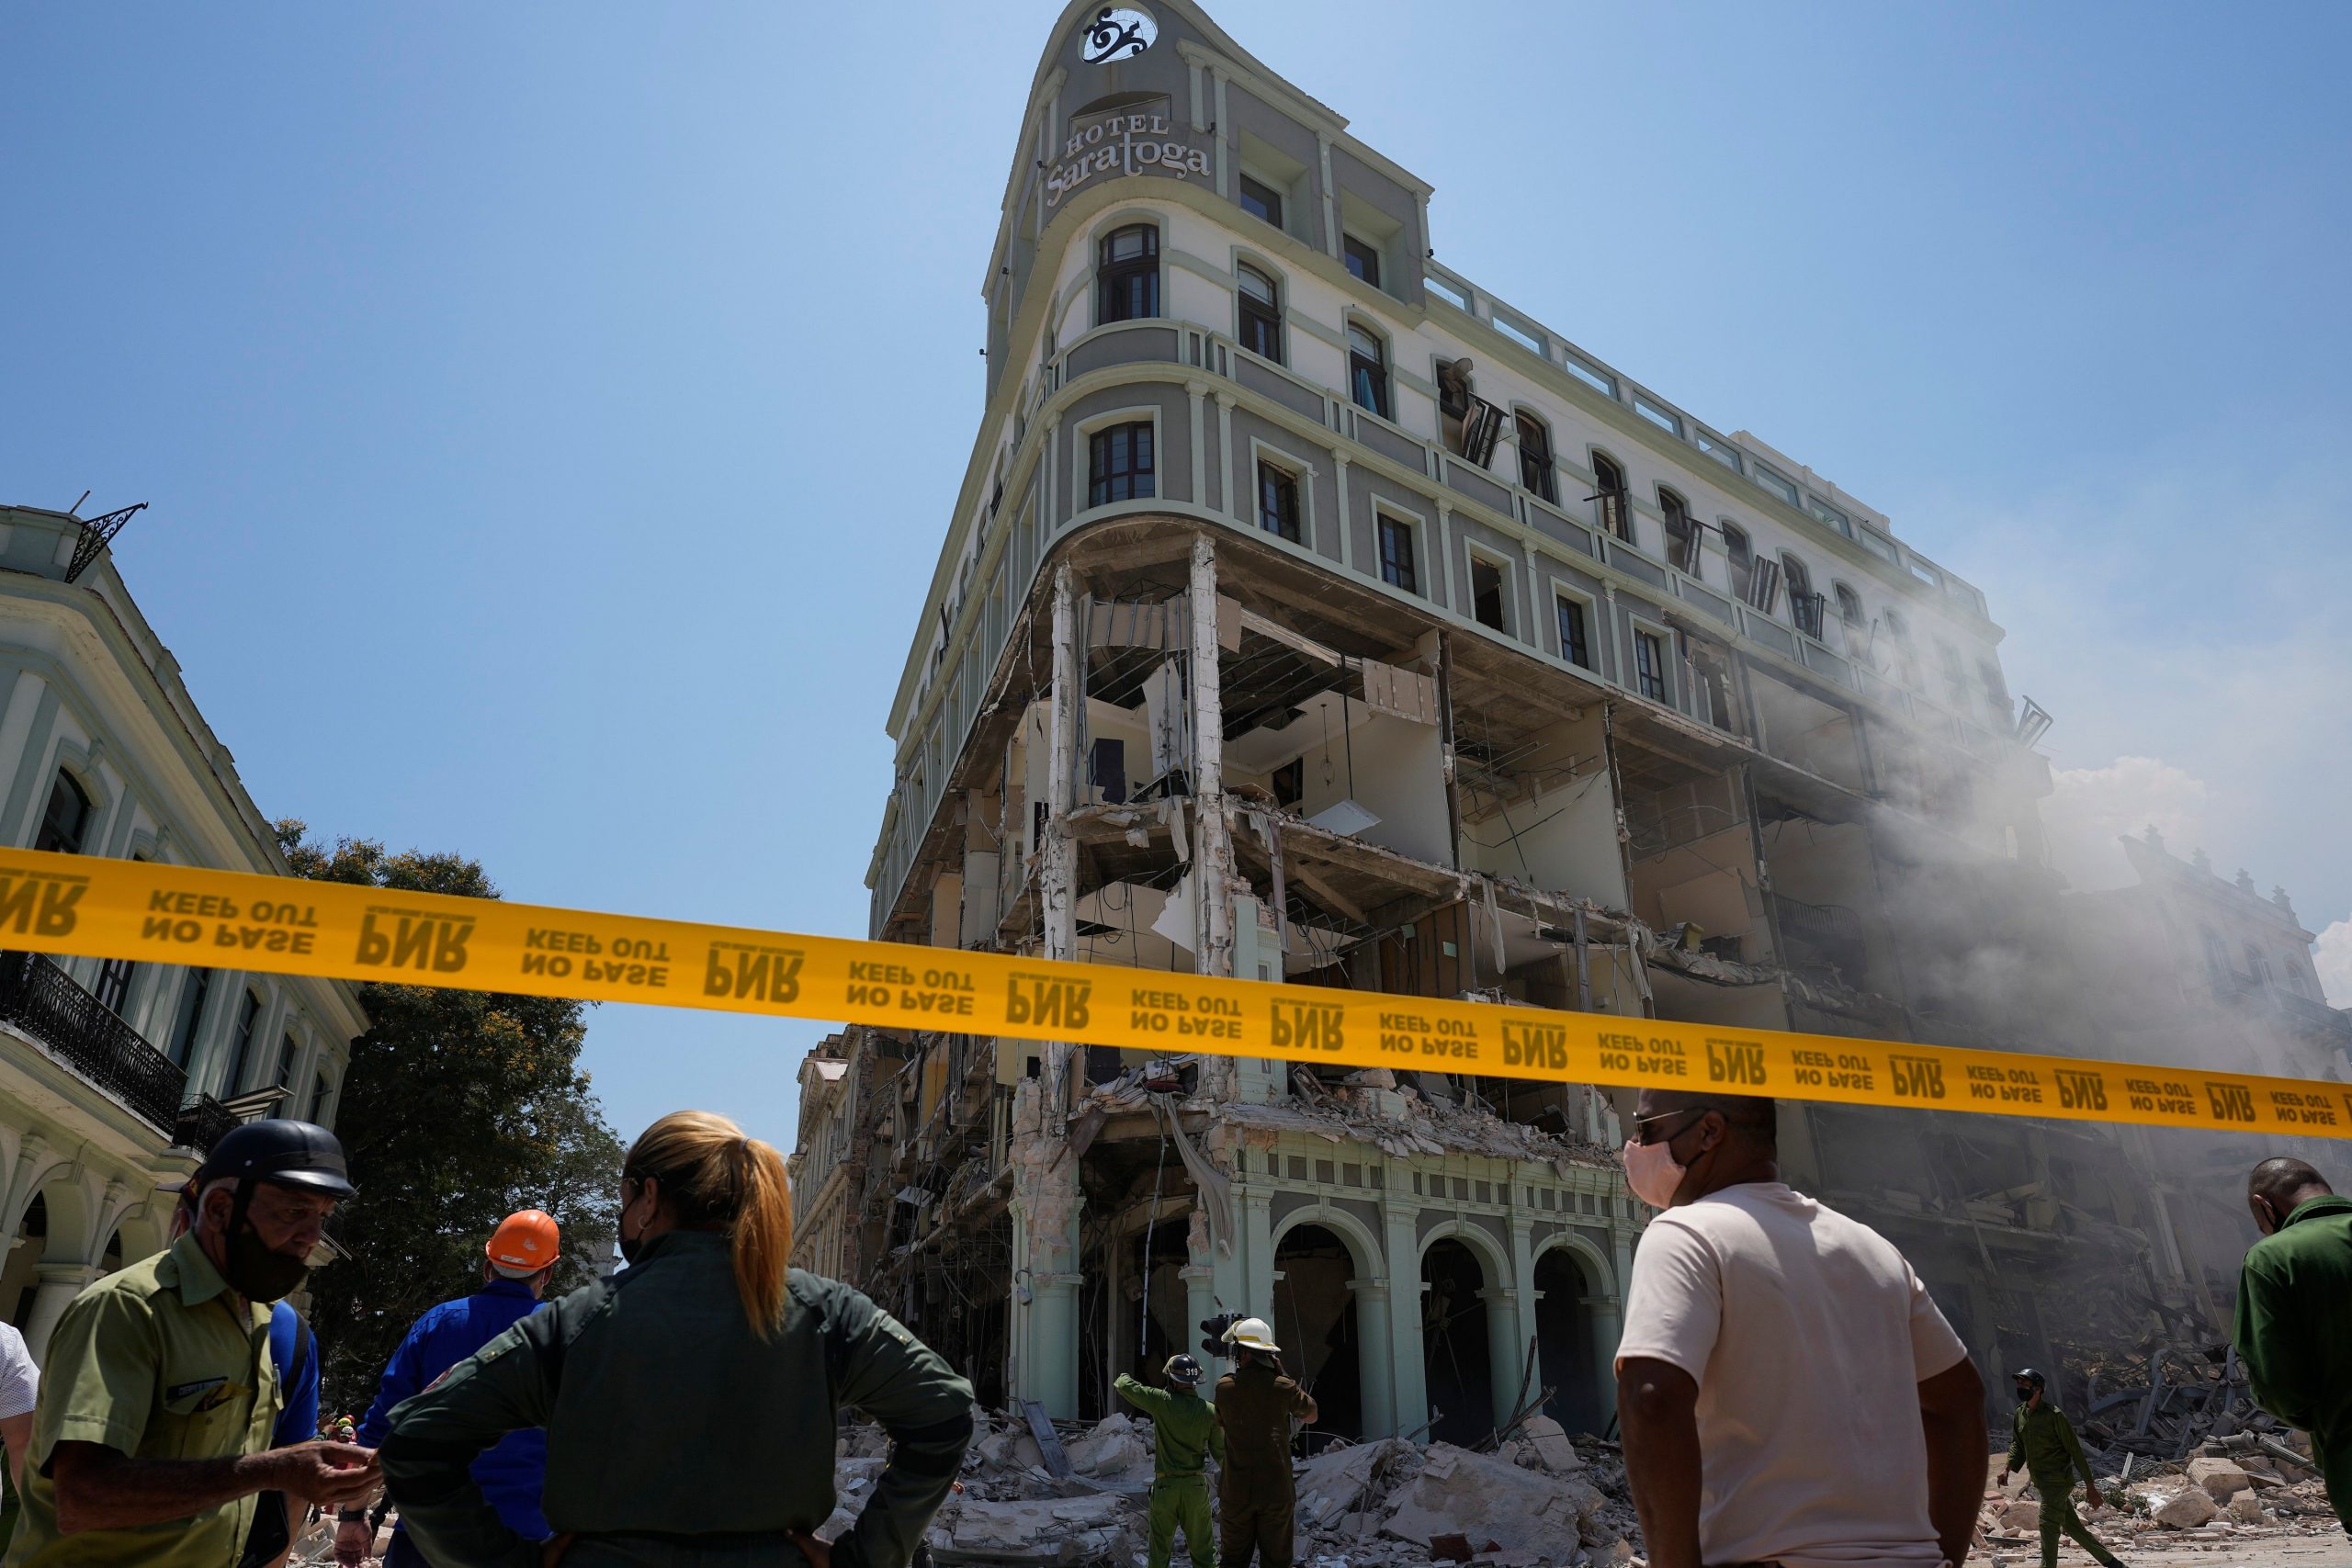 Havana hotel explosion: Here’s all you need to know | Video